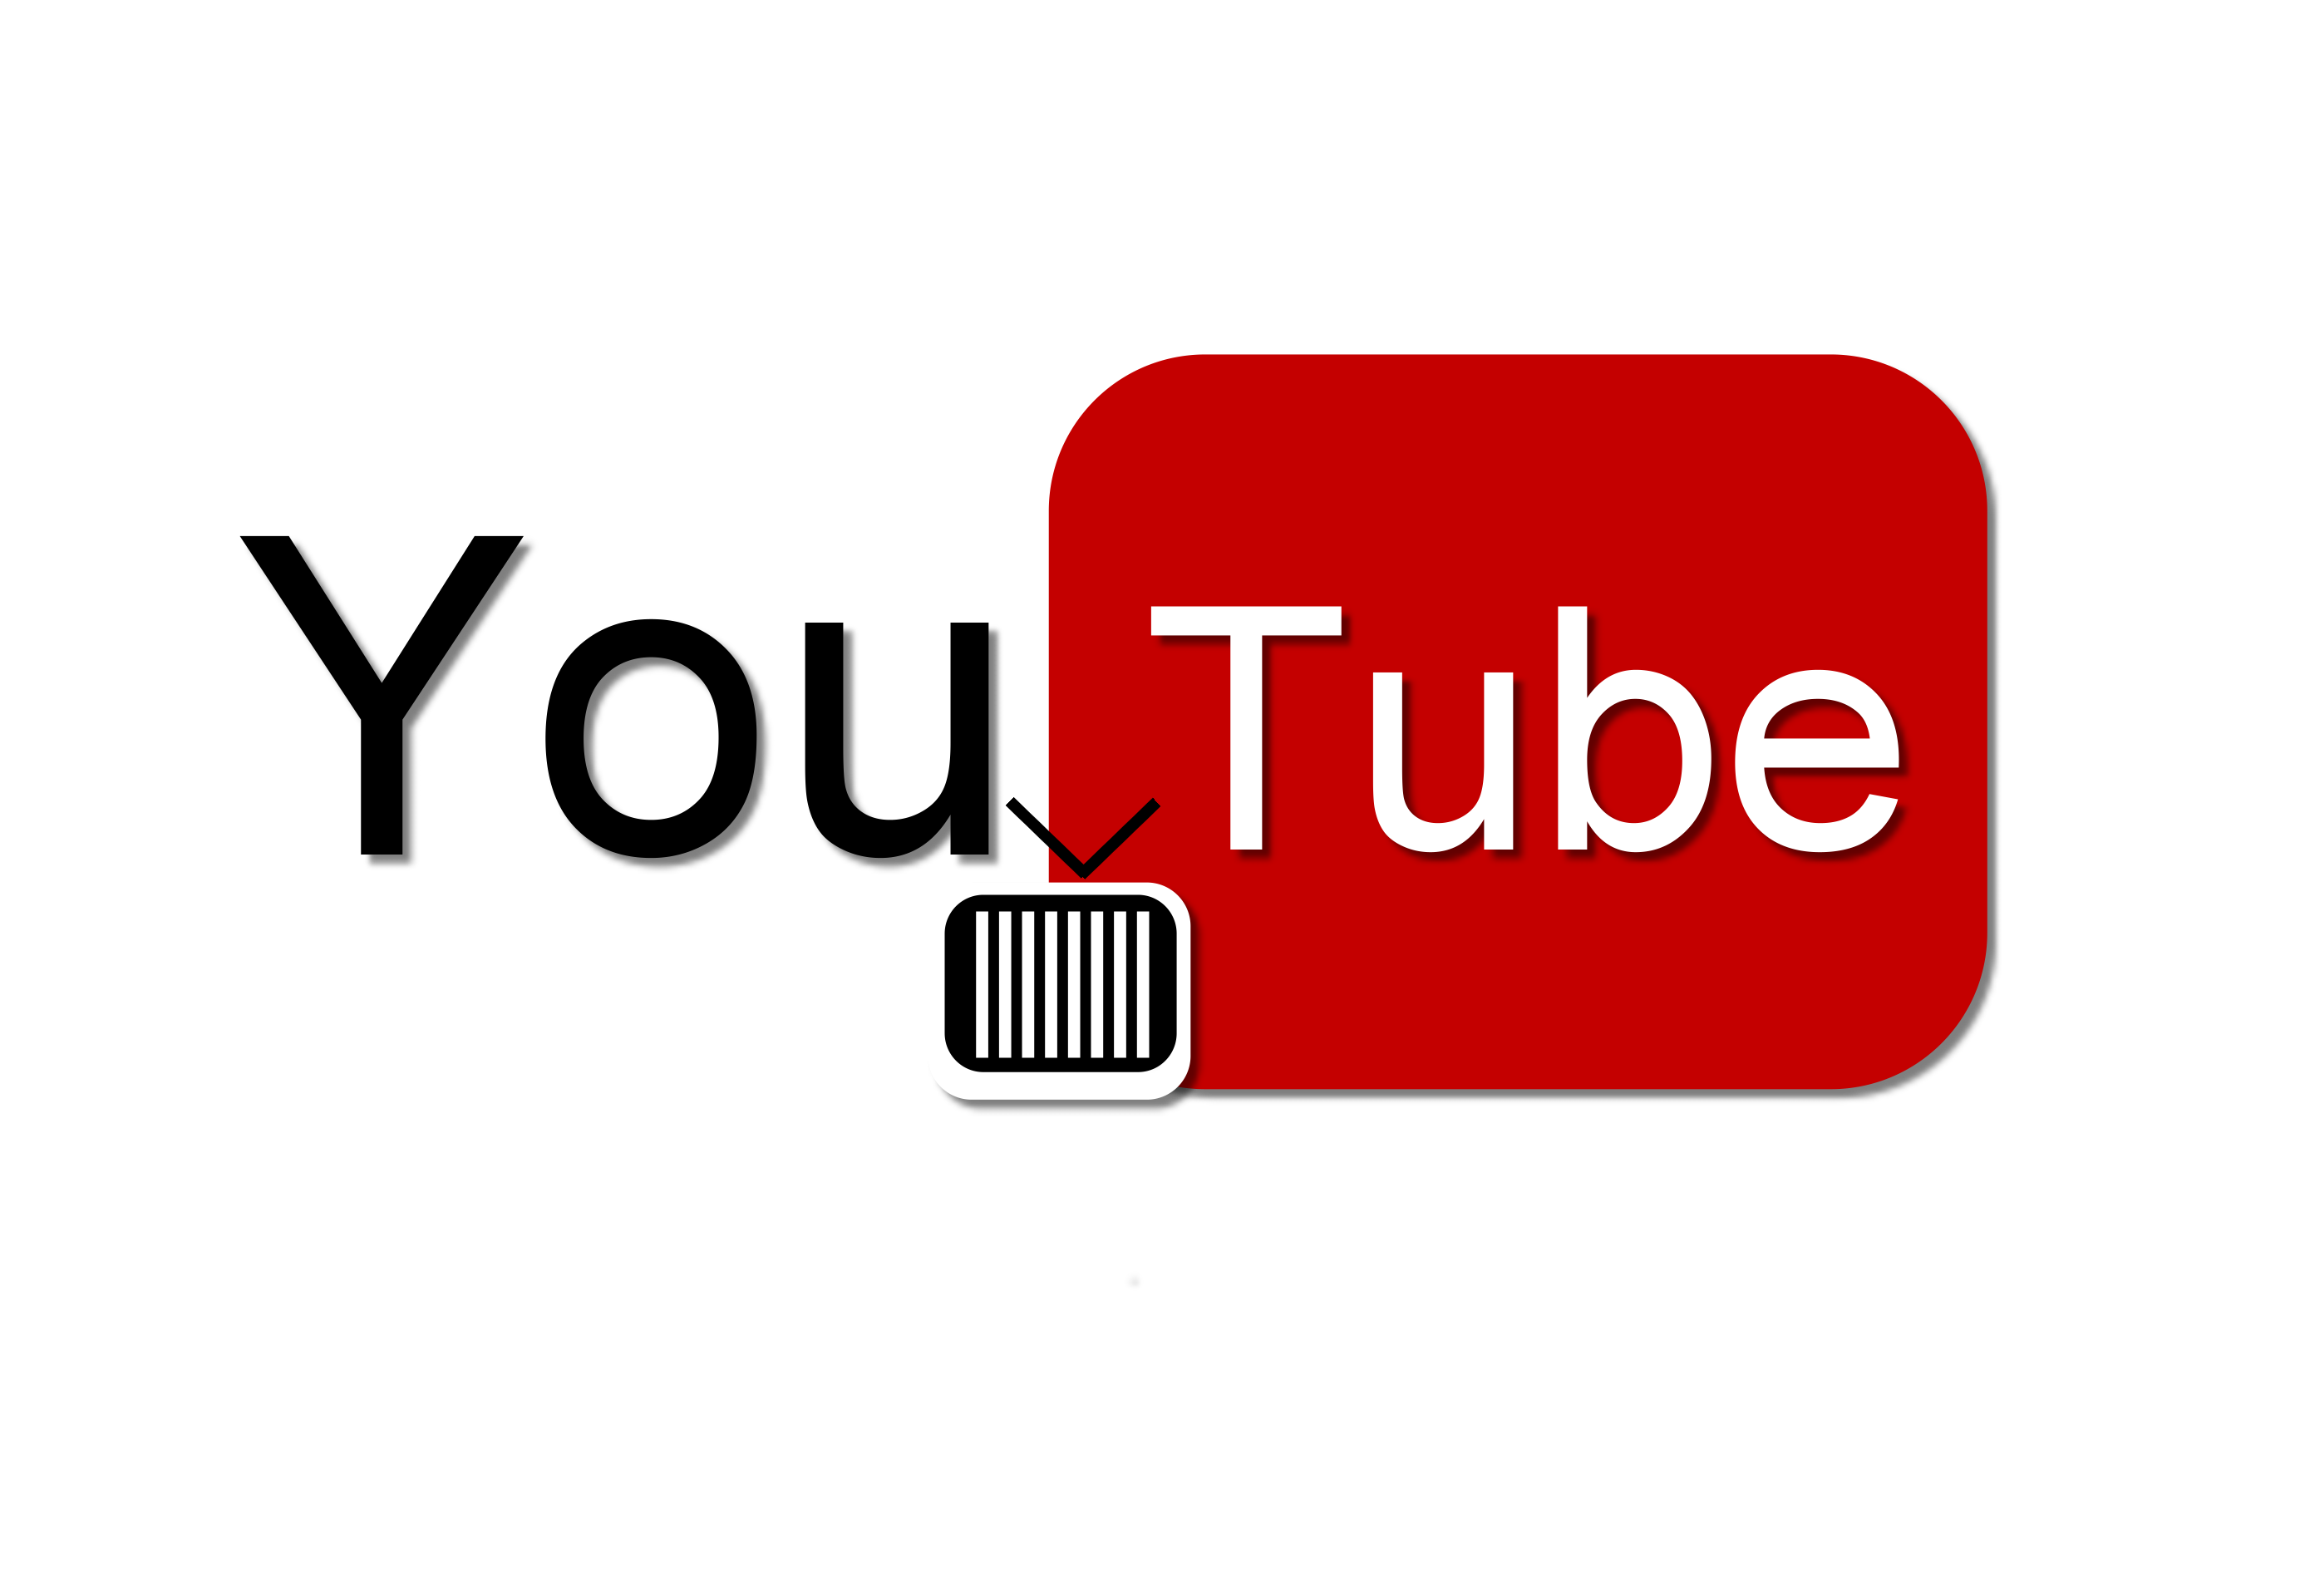 Red Black Logo Youtube On A White Background Free Image Download